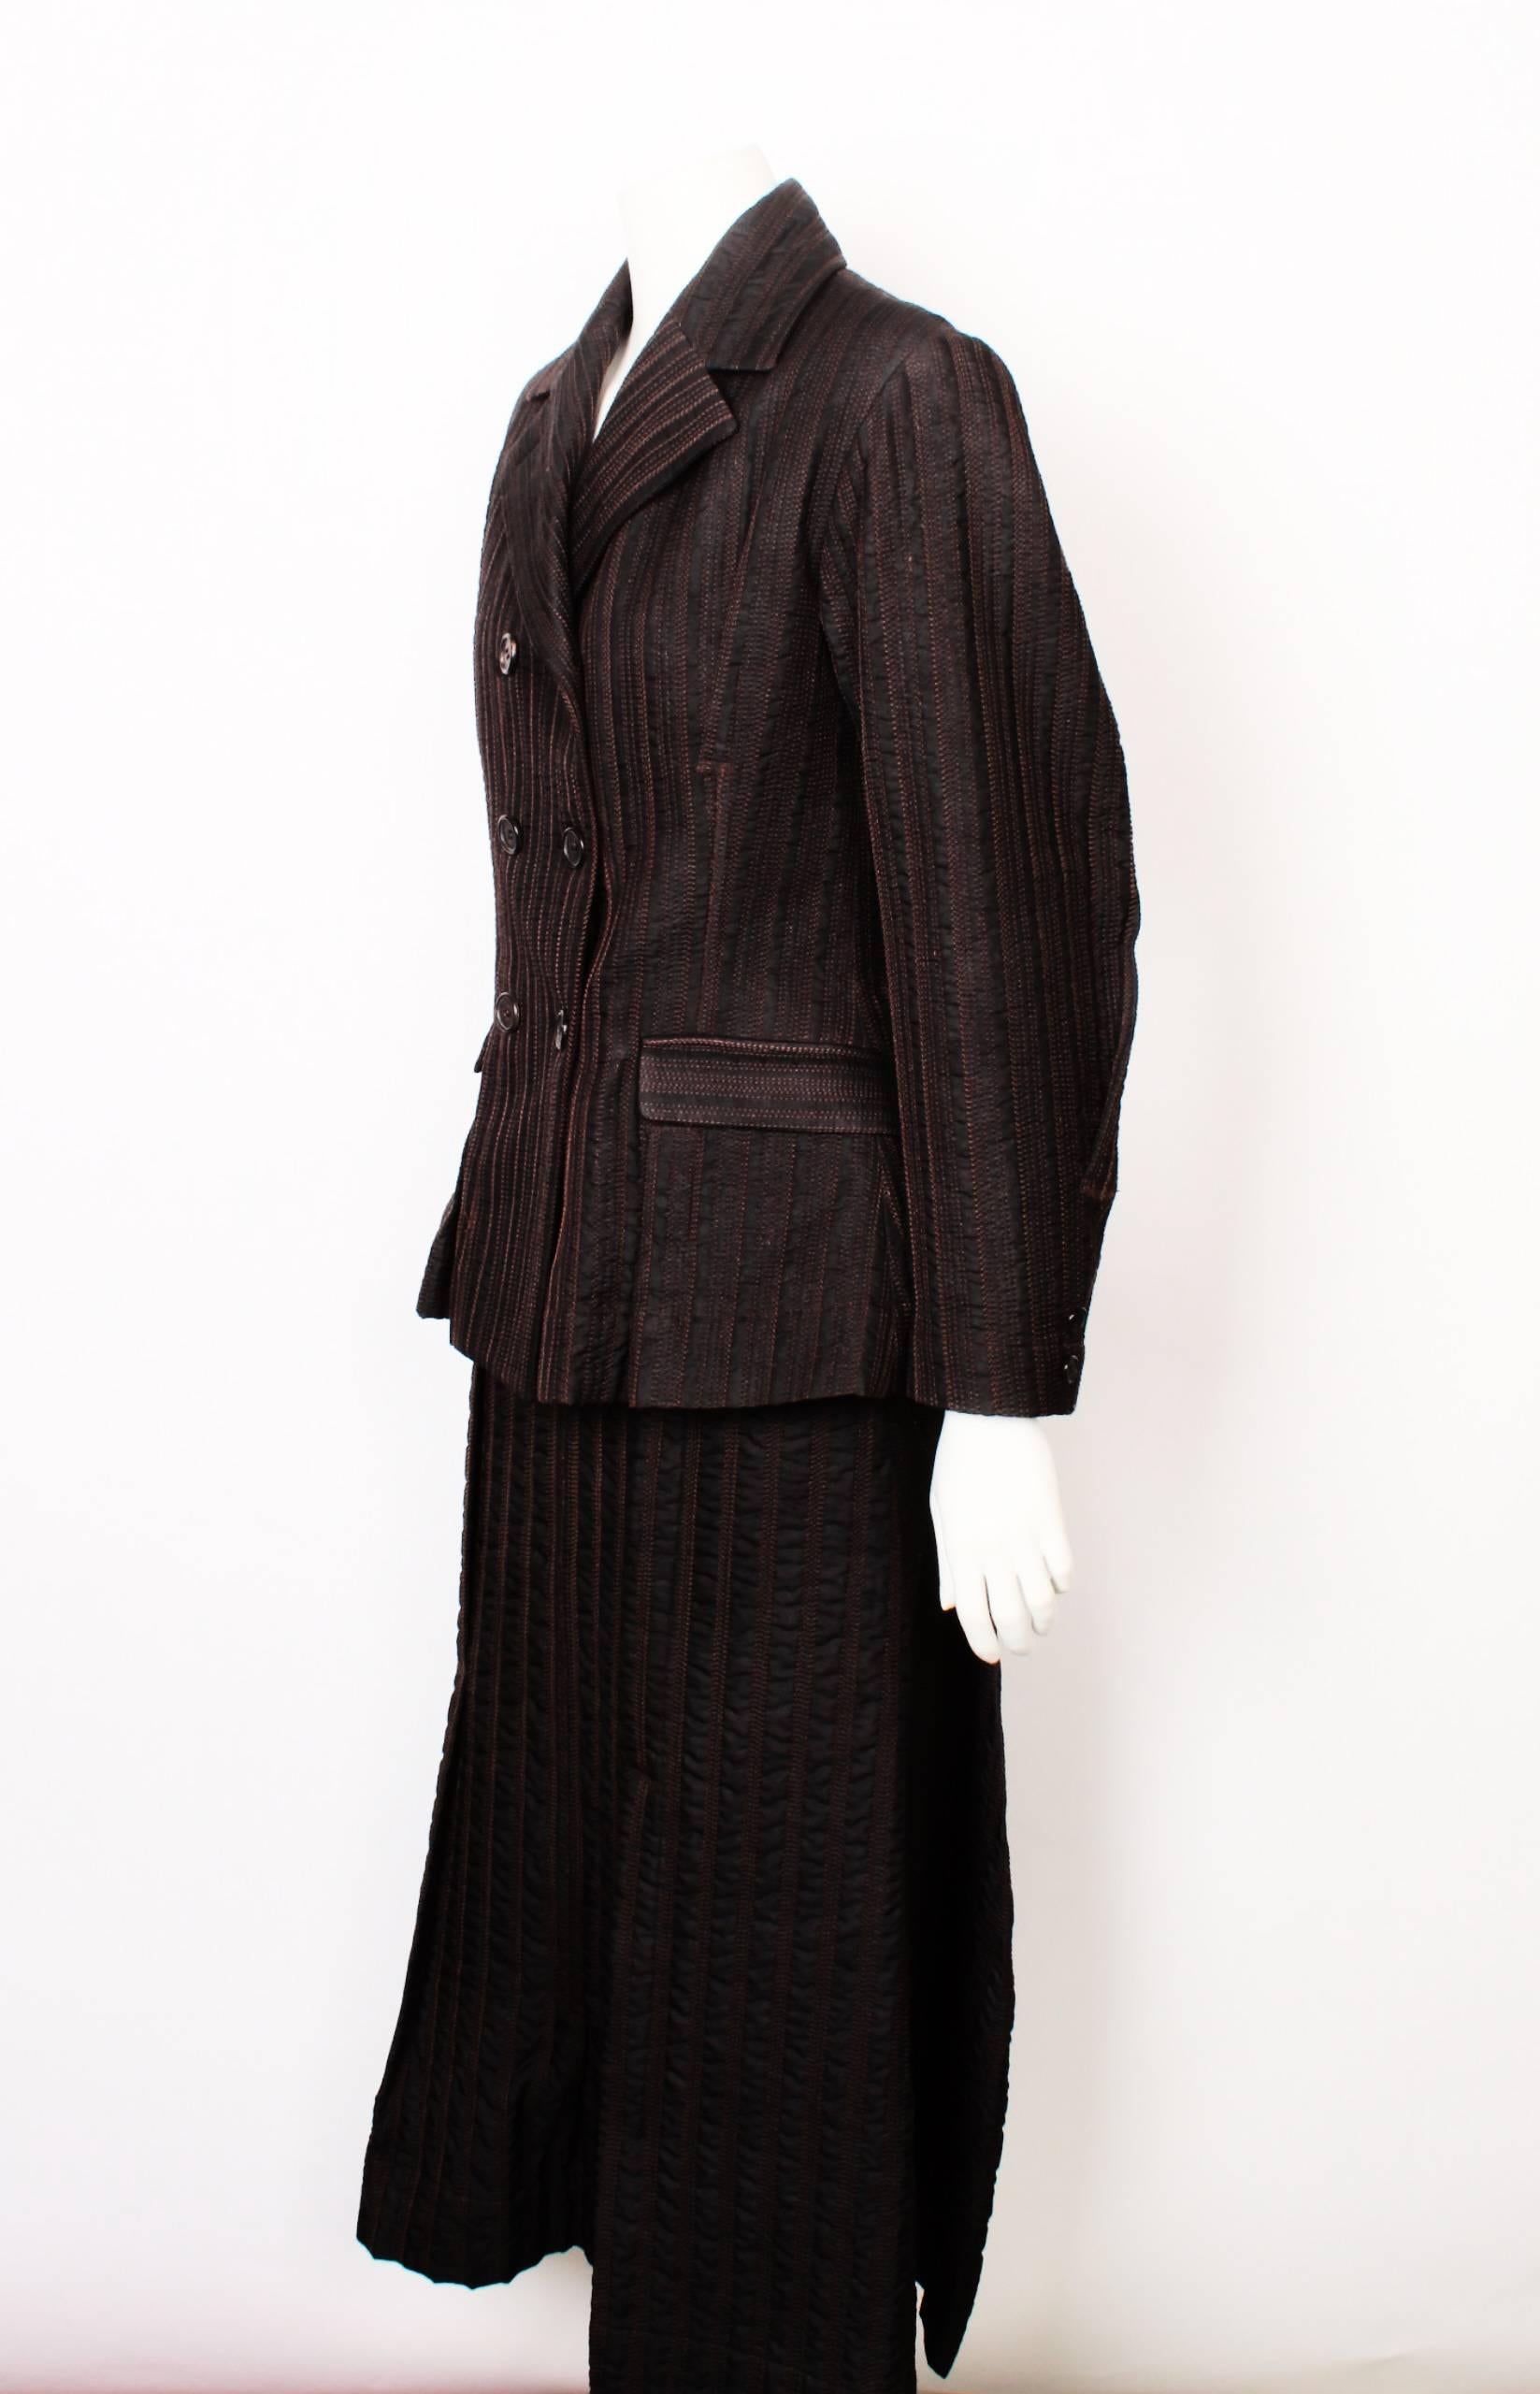 Black Issey Miyake Top Stitched Suit For Sale